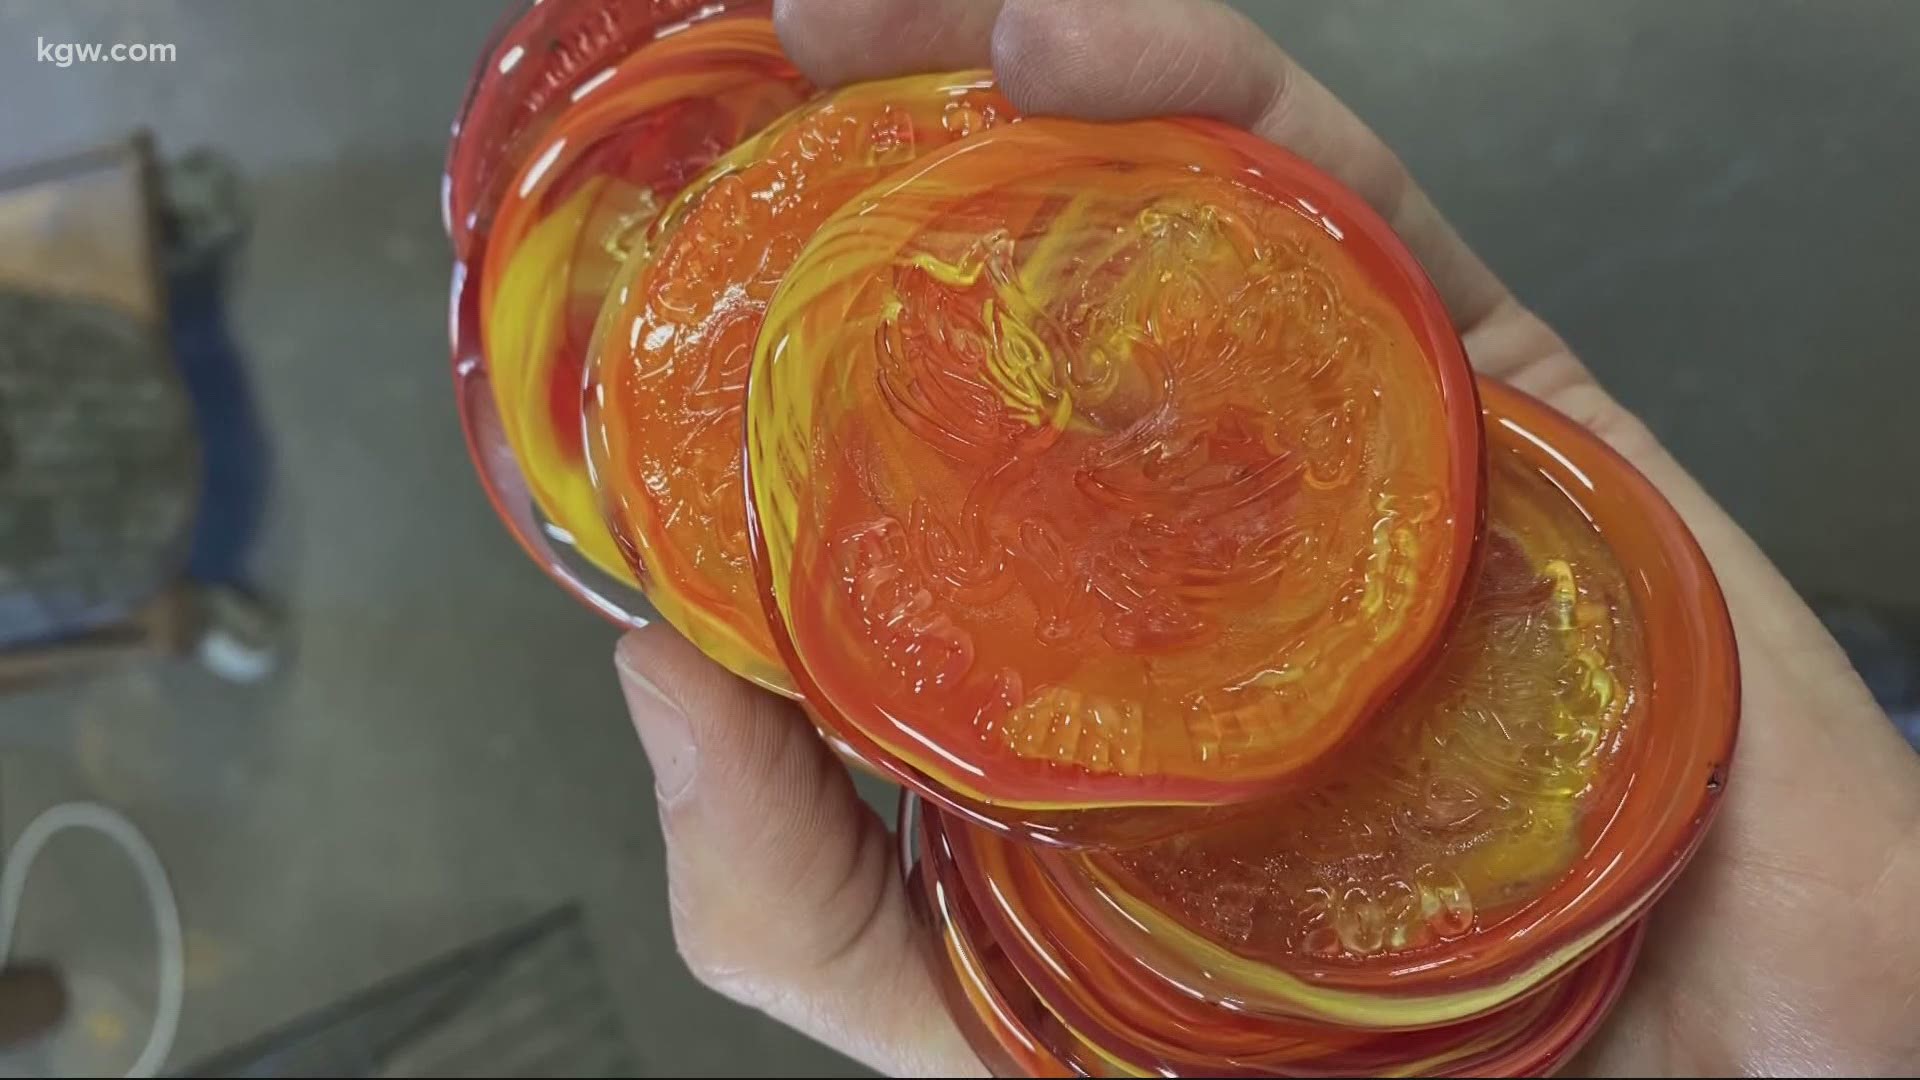 Glass blowing artist Kelly Howard and artist friends used ashes from the Echo Mountain Fire to create pieces of art that will be auctioned off to help victims.